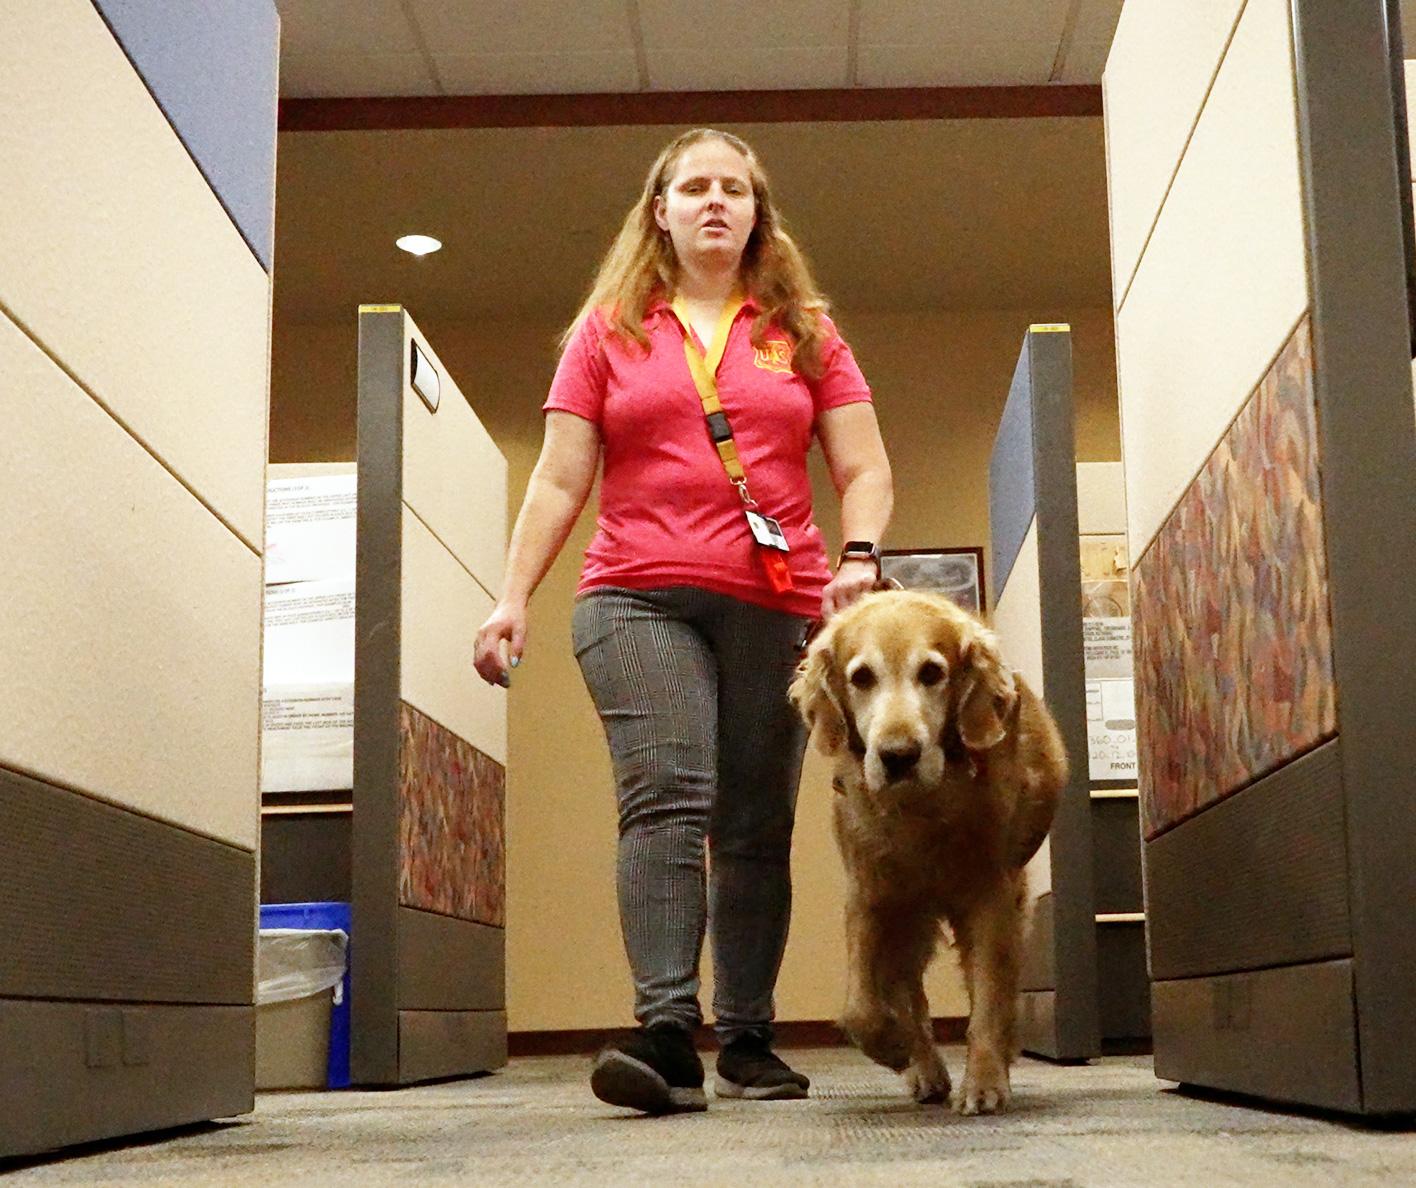 Woman in pink shirt walking with golden retriever in office building